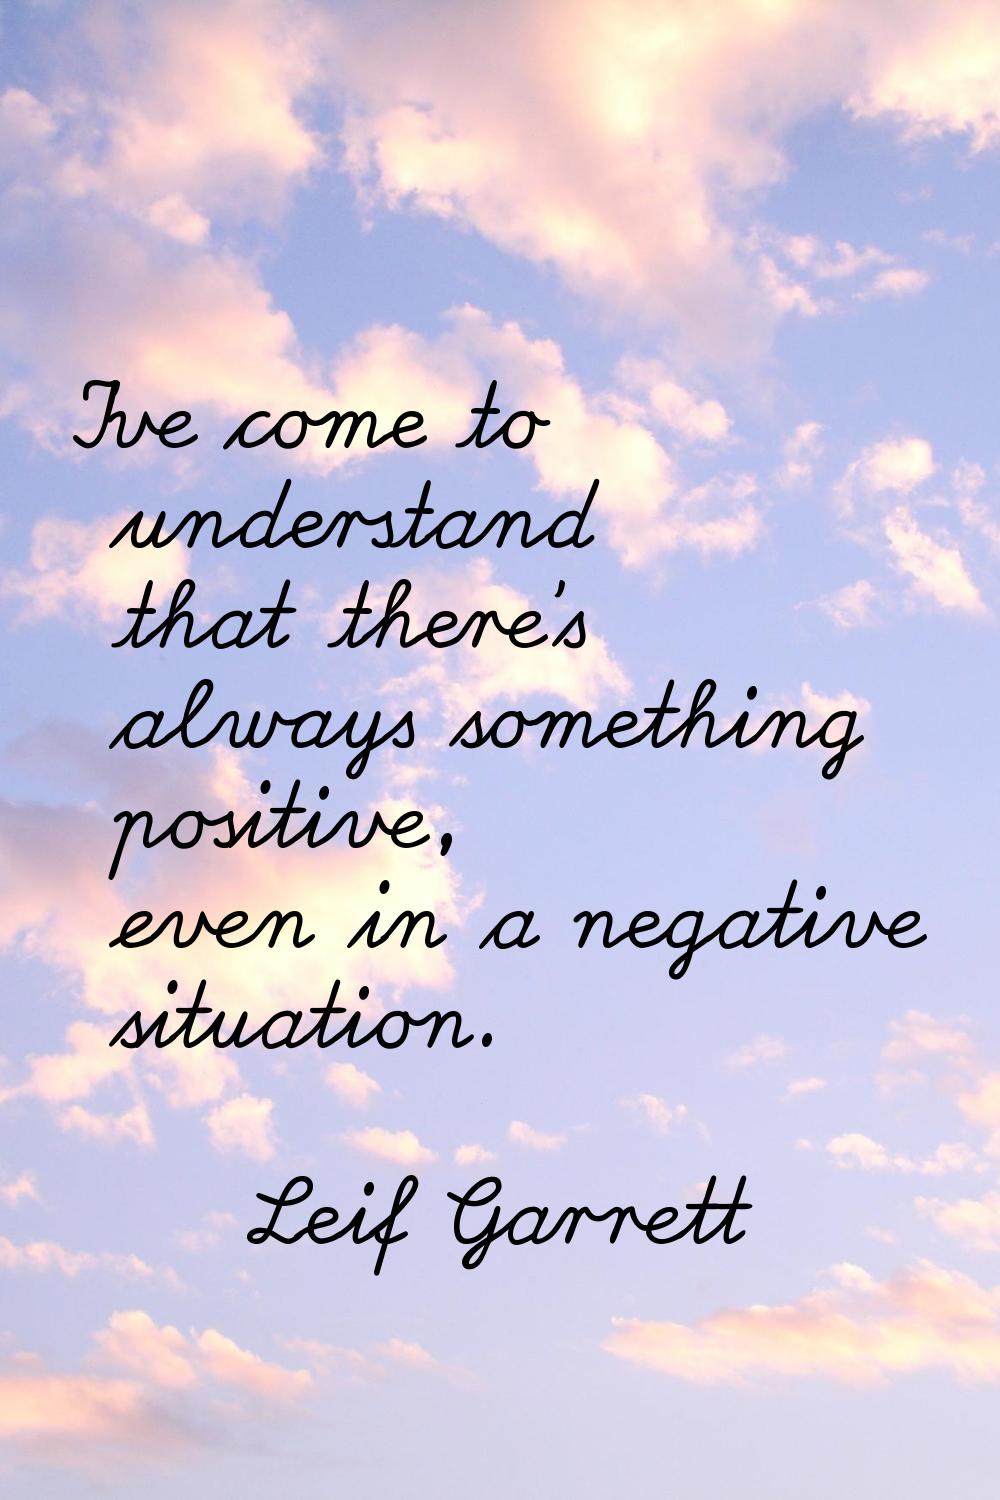 I've come to understand that there's always something positive, even in a negative situation.